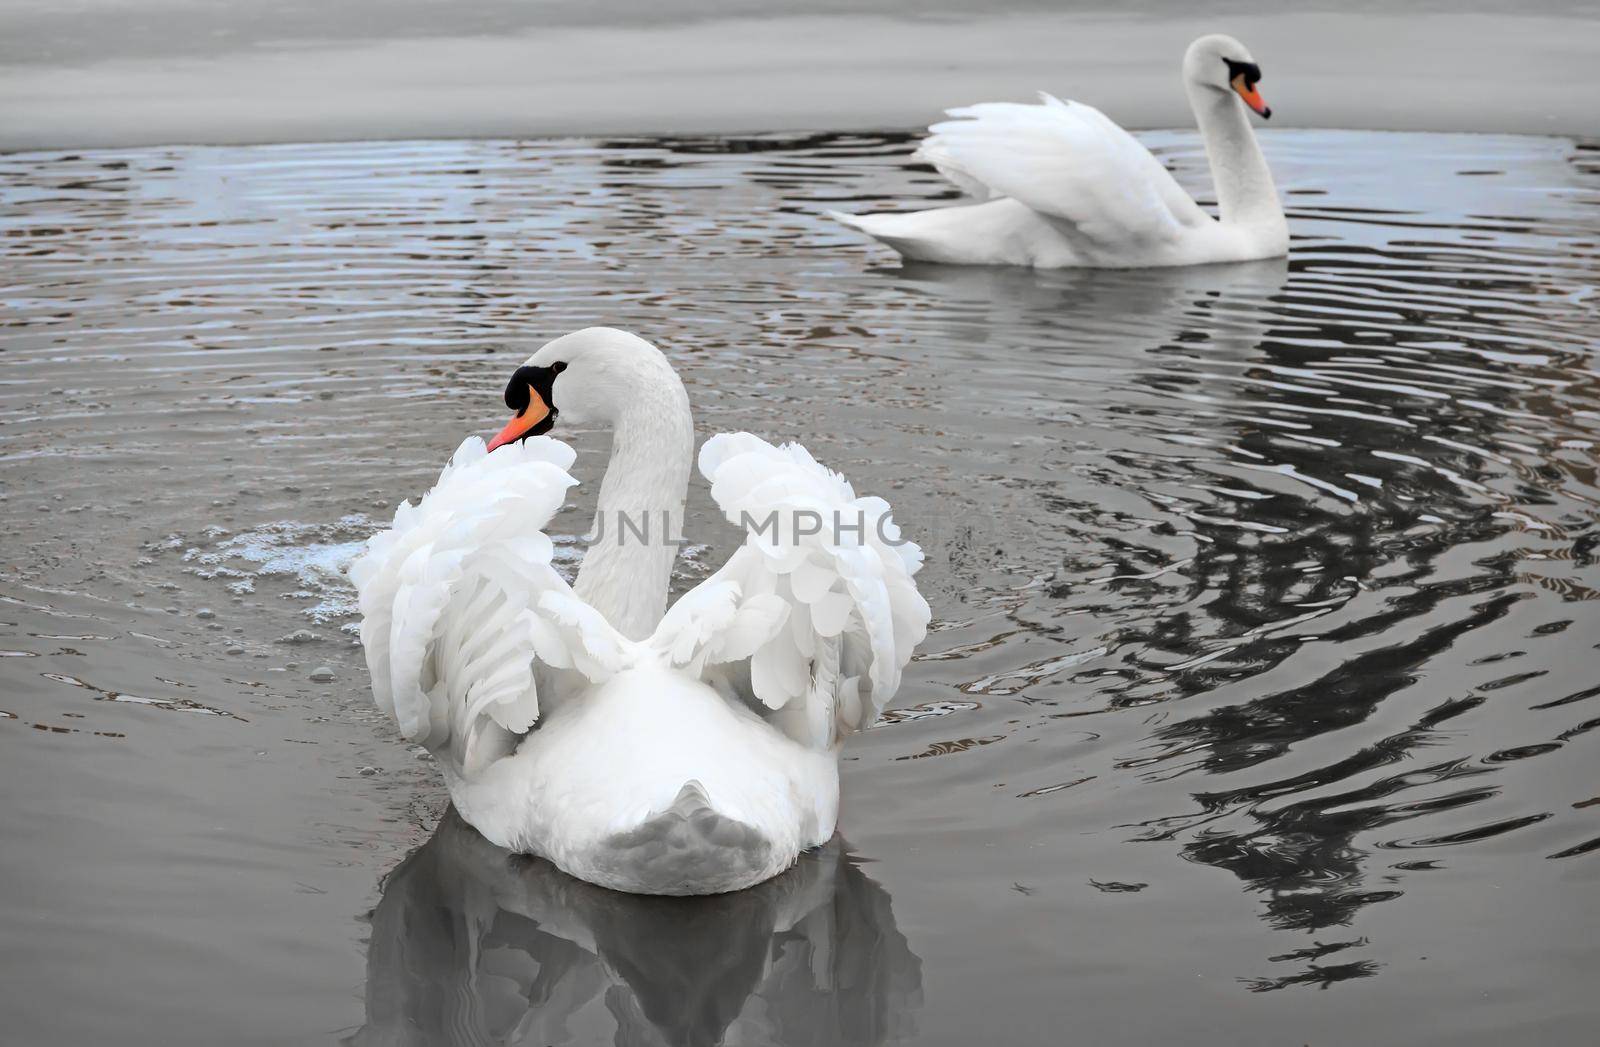 Two beautiful white swans float on the surface of the lake, the shores of which are covered with snow.